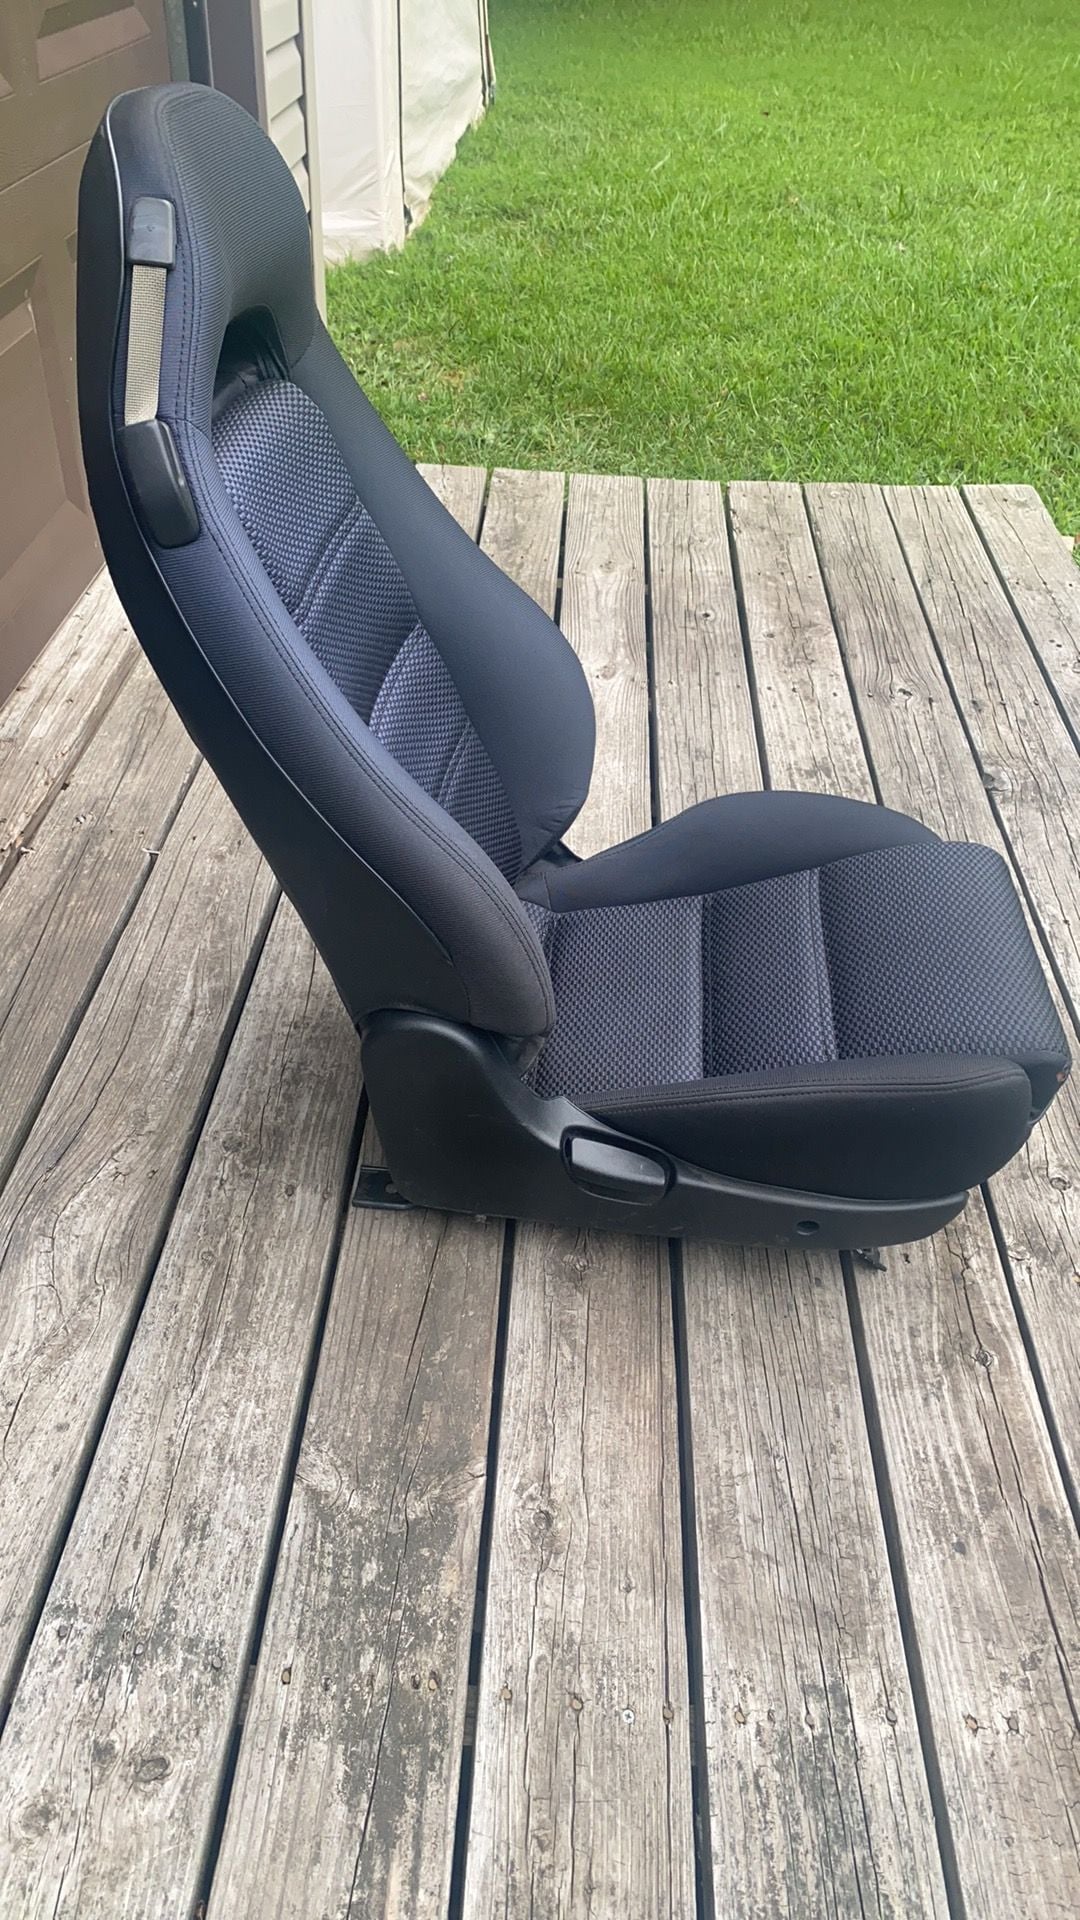 Interior/Upholstery - RX-7 FD RHD Drivers Right Seat! Or can be also used for LHD FD Passenger seat! - Used - 1992 to 2002 Mazda RX-7 - Prince Frederick, MD 20678, United States